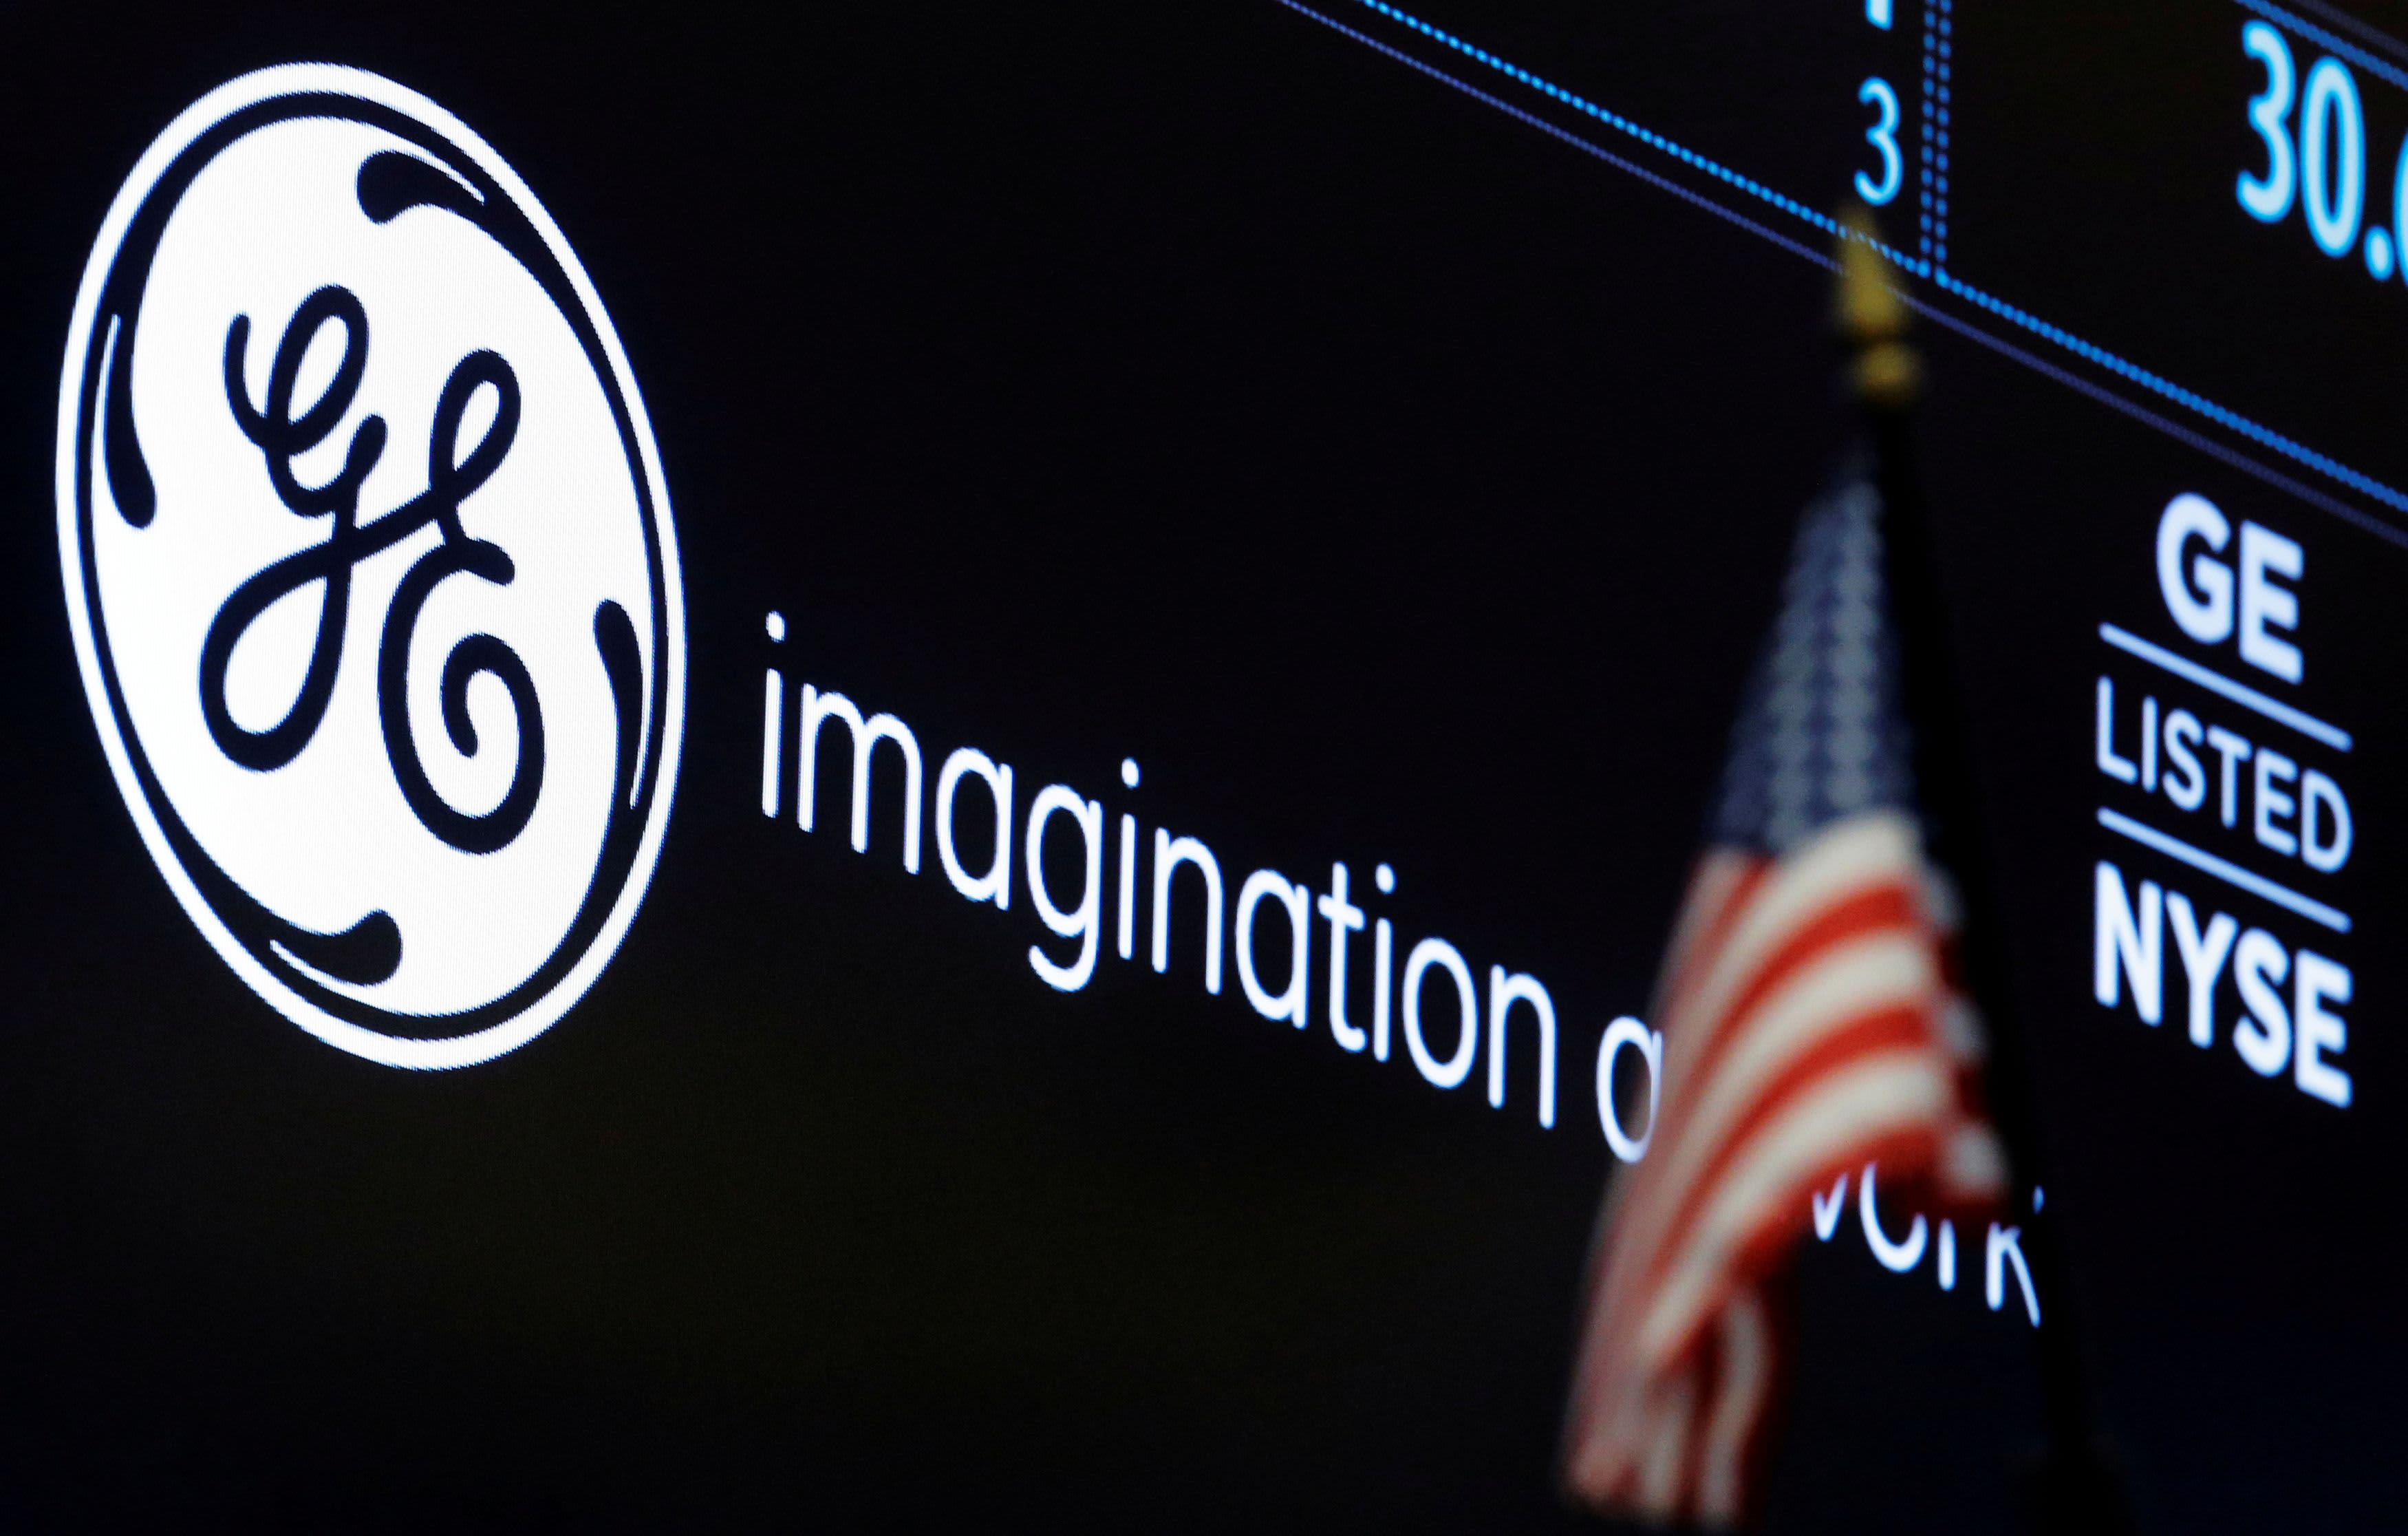 Oppenheimer upgrades General Electric, says the industrial giant's outlook is improving